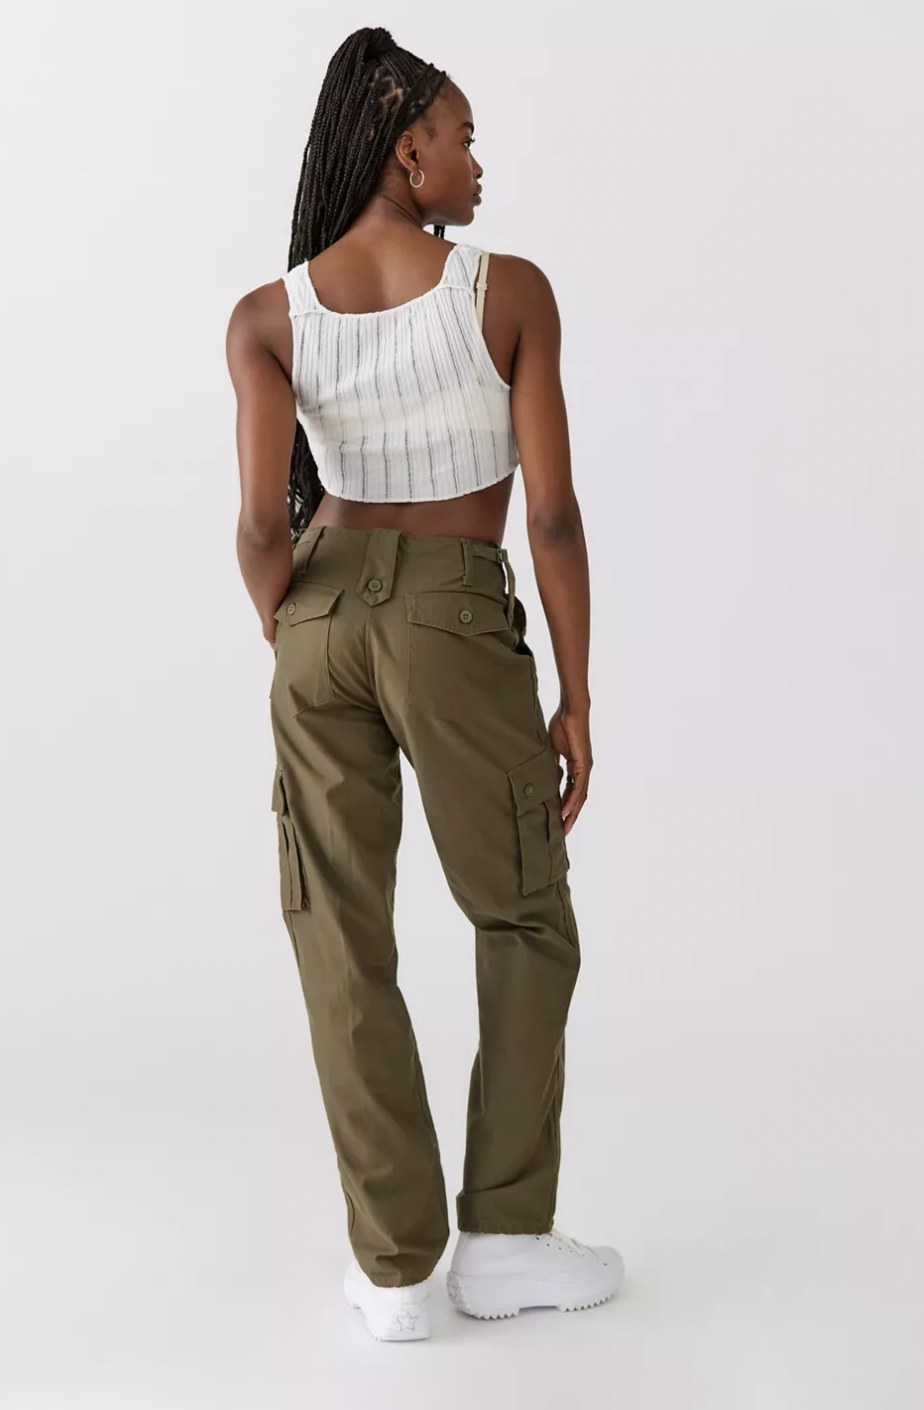 Model from behind in the green cargo pants, featuring lots of utility pockets on the side